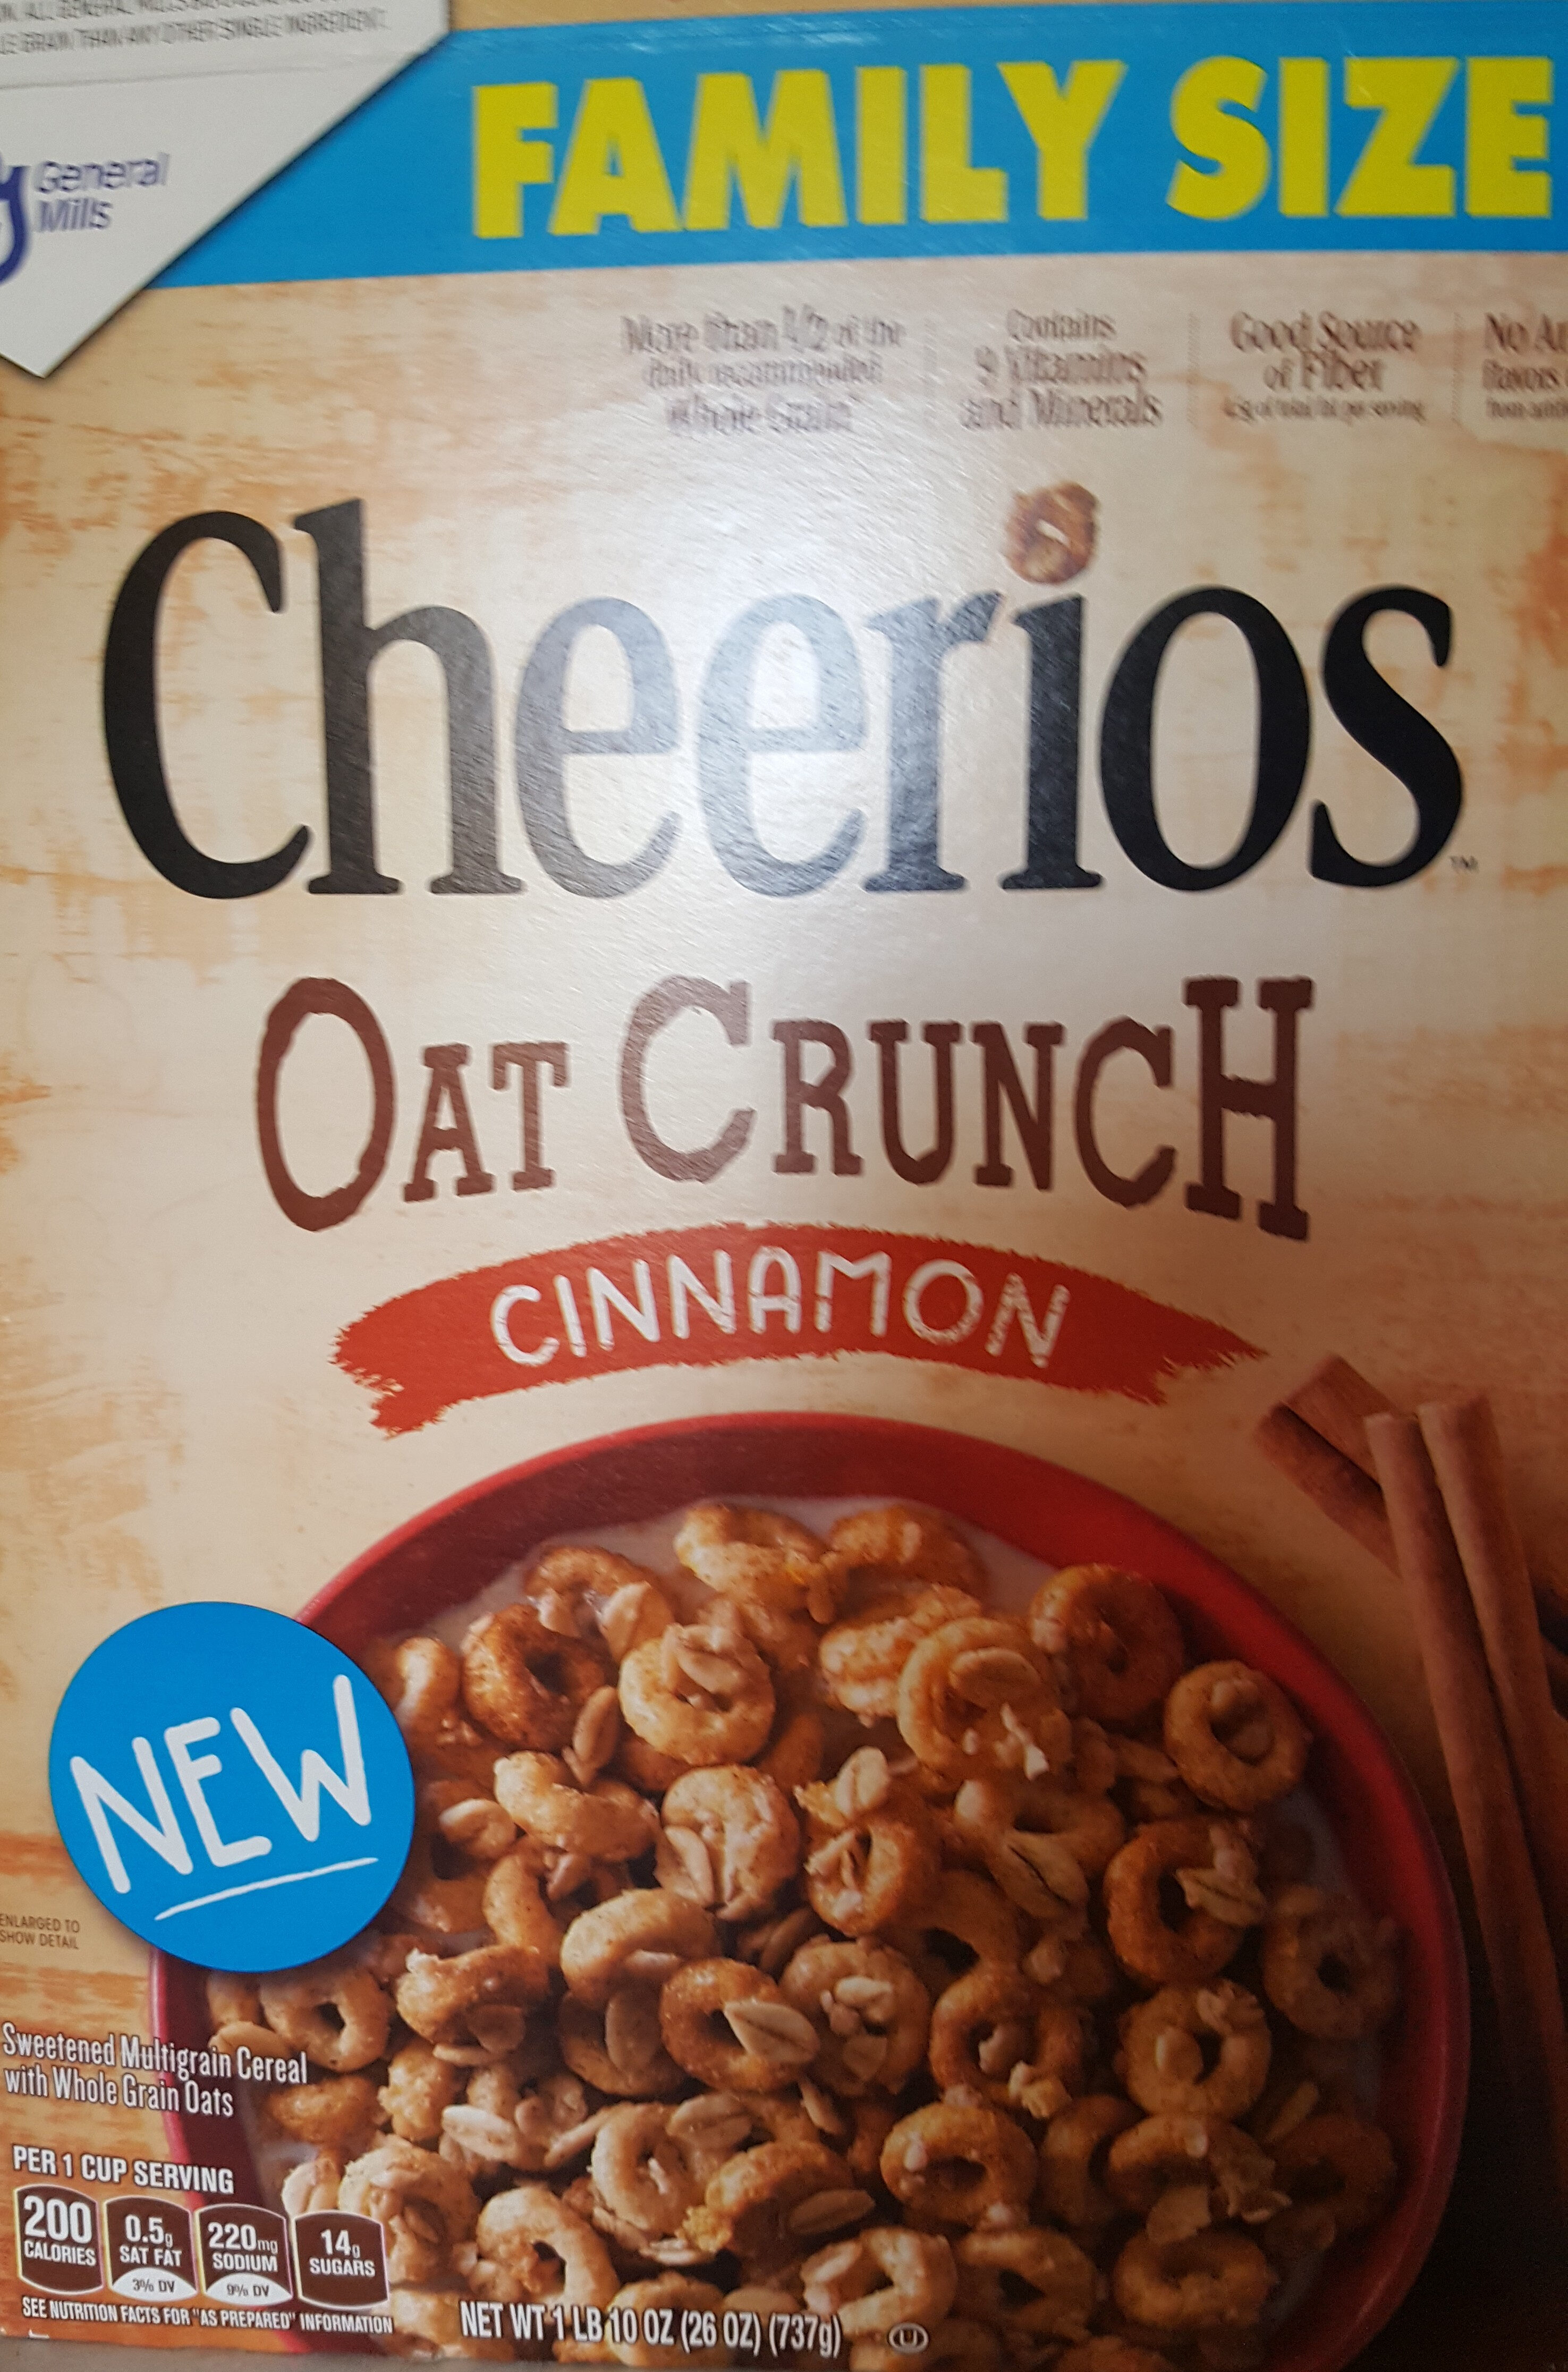 Cinnamon oat crunch cheerios cereal with oats - Product